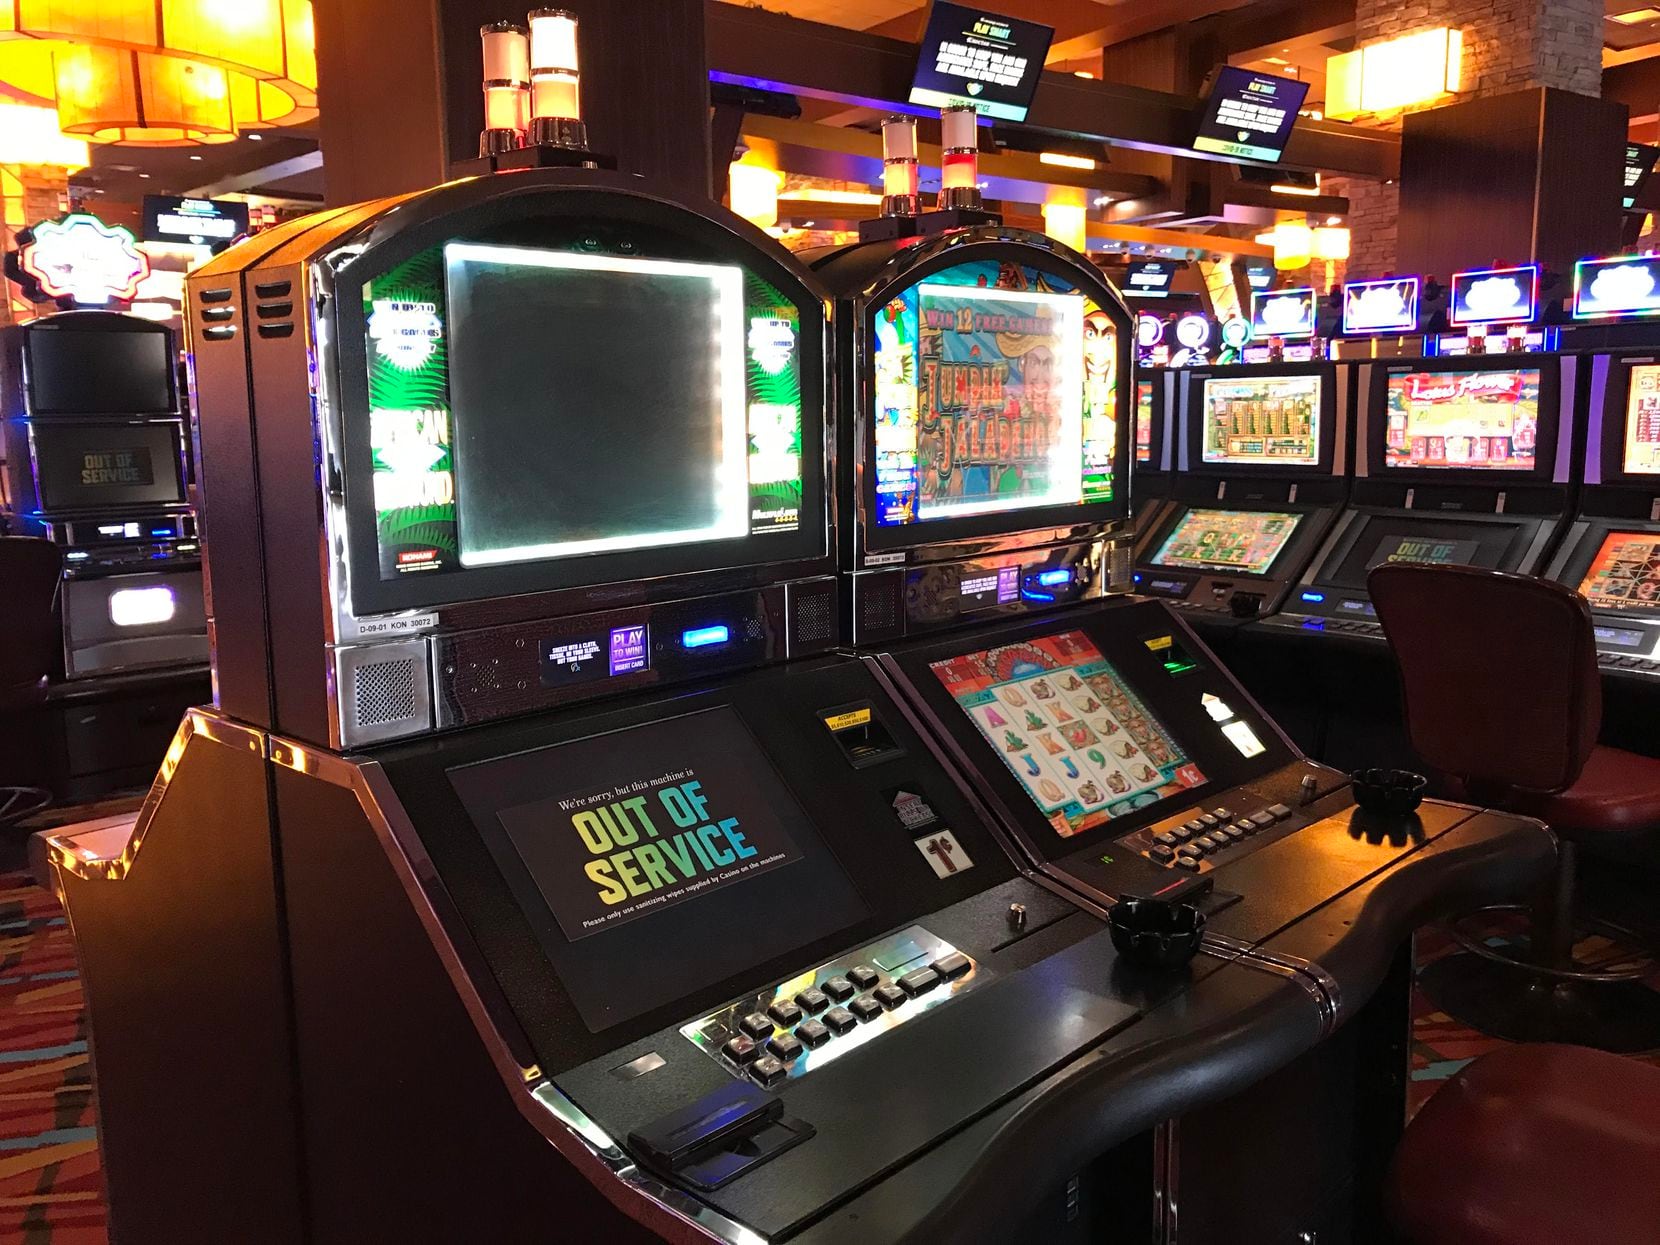 Choctaw's Durant casino joins WinStar in reopening Wednesday